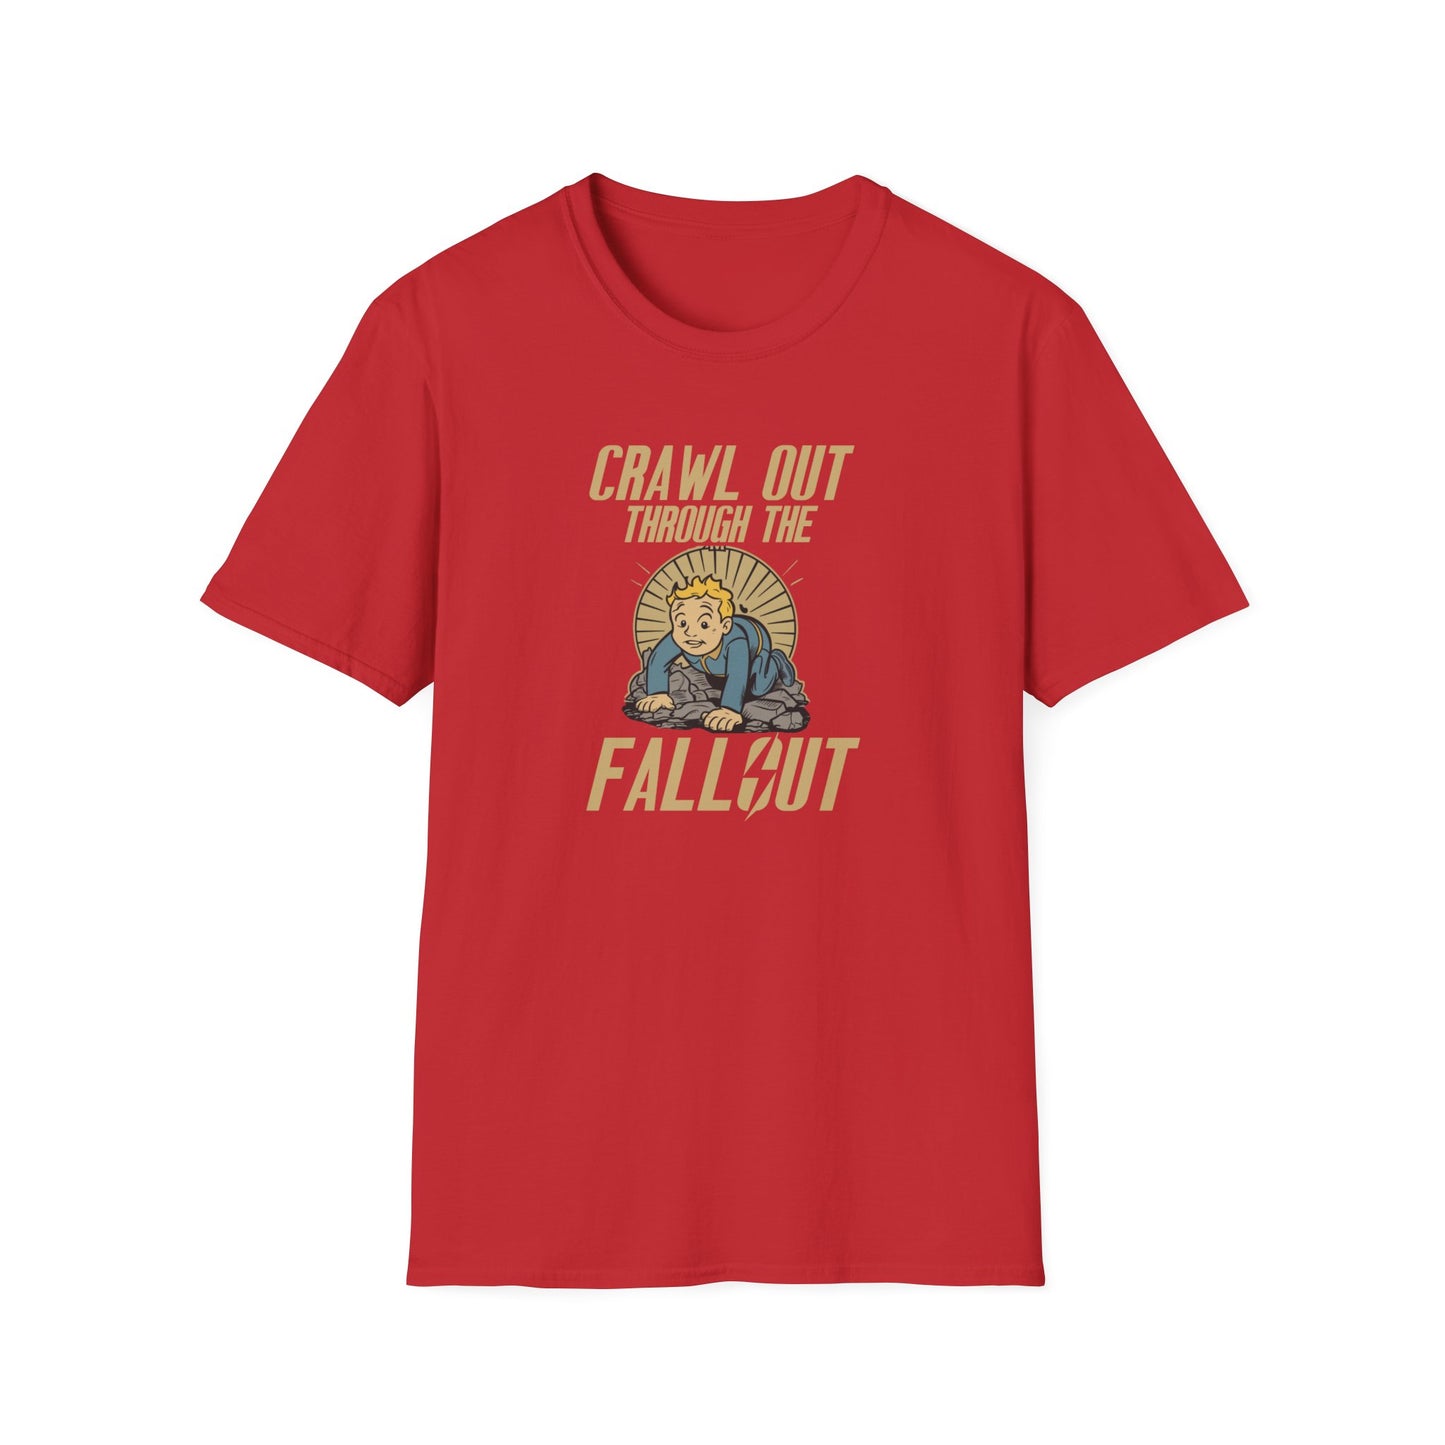 Fallout Wasteland T-Shirt "Crawl Out Through The Fallout"